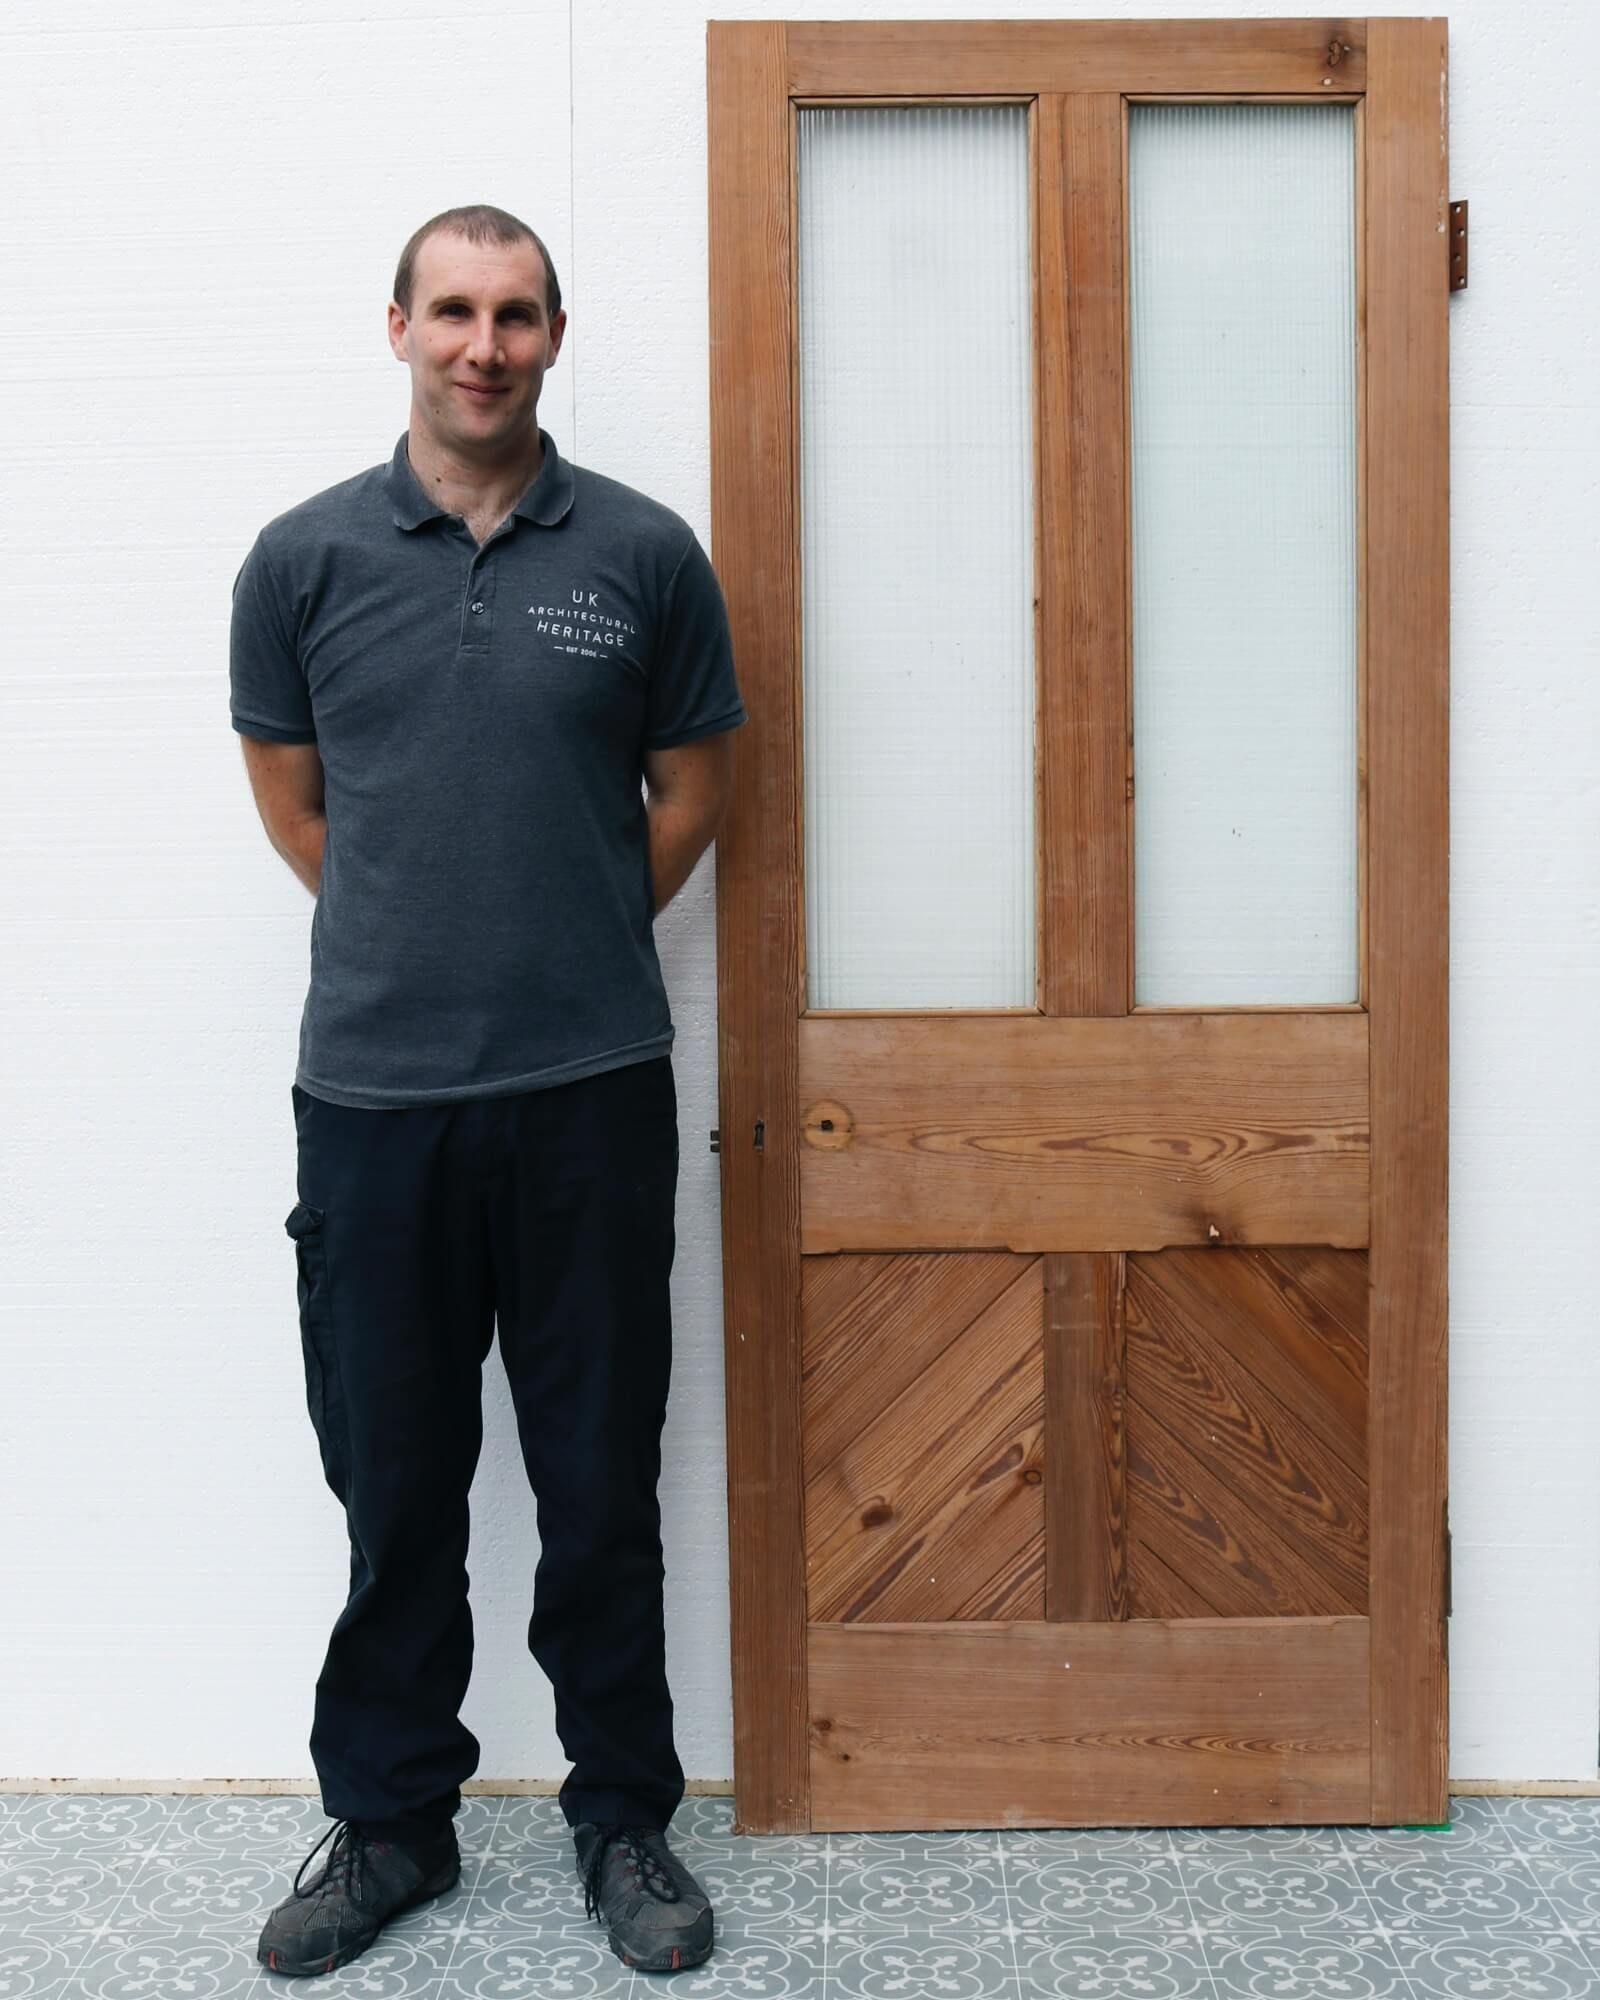 A smart and sturdy reclaimed half glazed pitch pine internal door dating from the late 19th century. This door has been dipped, giving it an appealing warm wood colour, and half glazed with reeded glass, making it an ideal reclaimed door for a